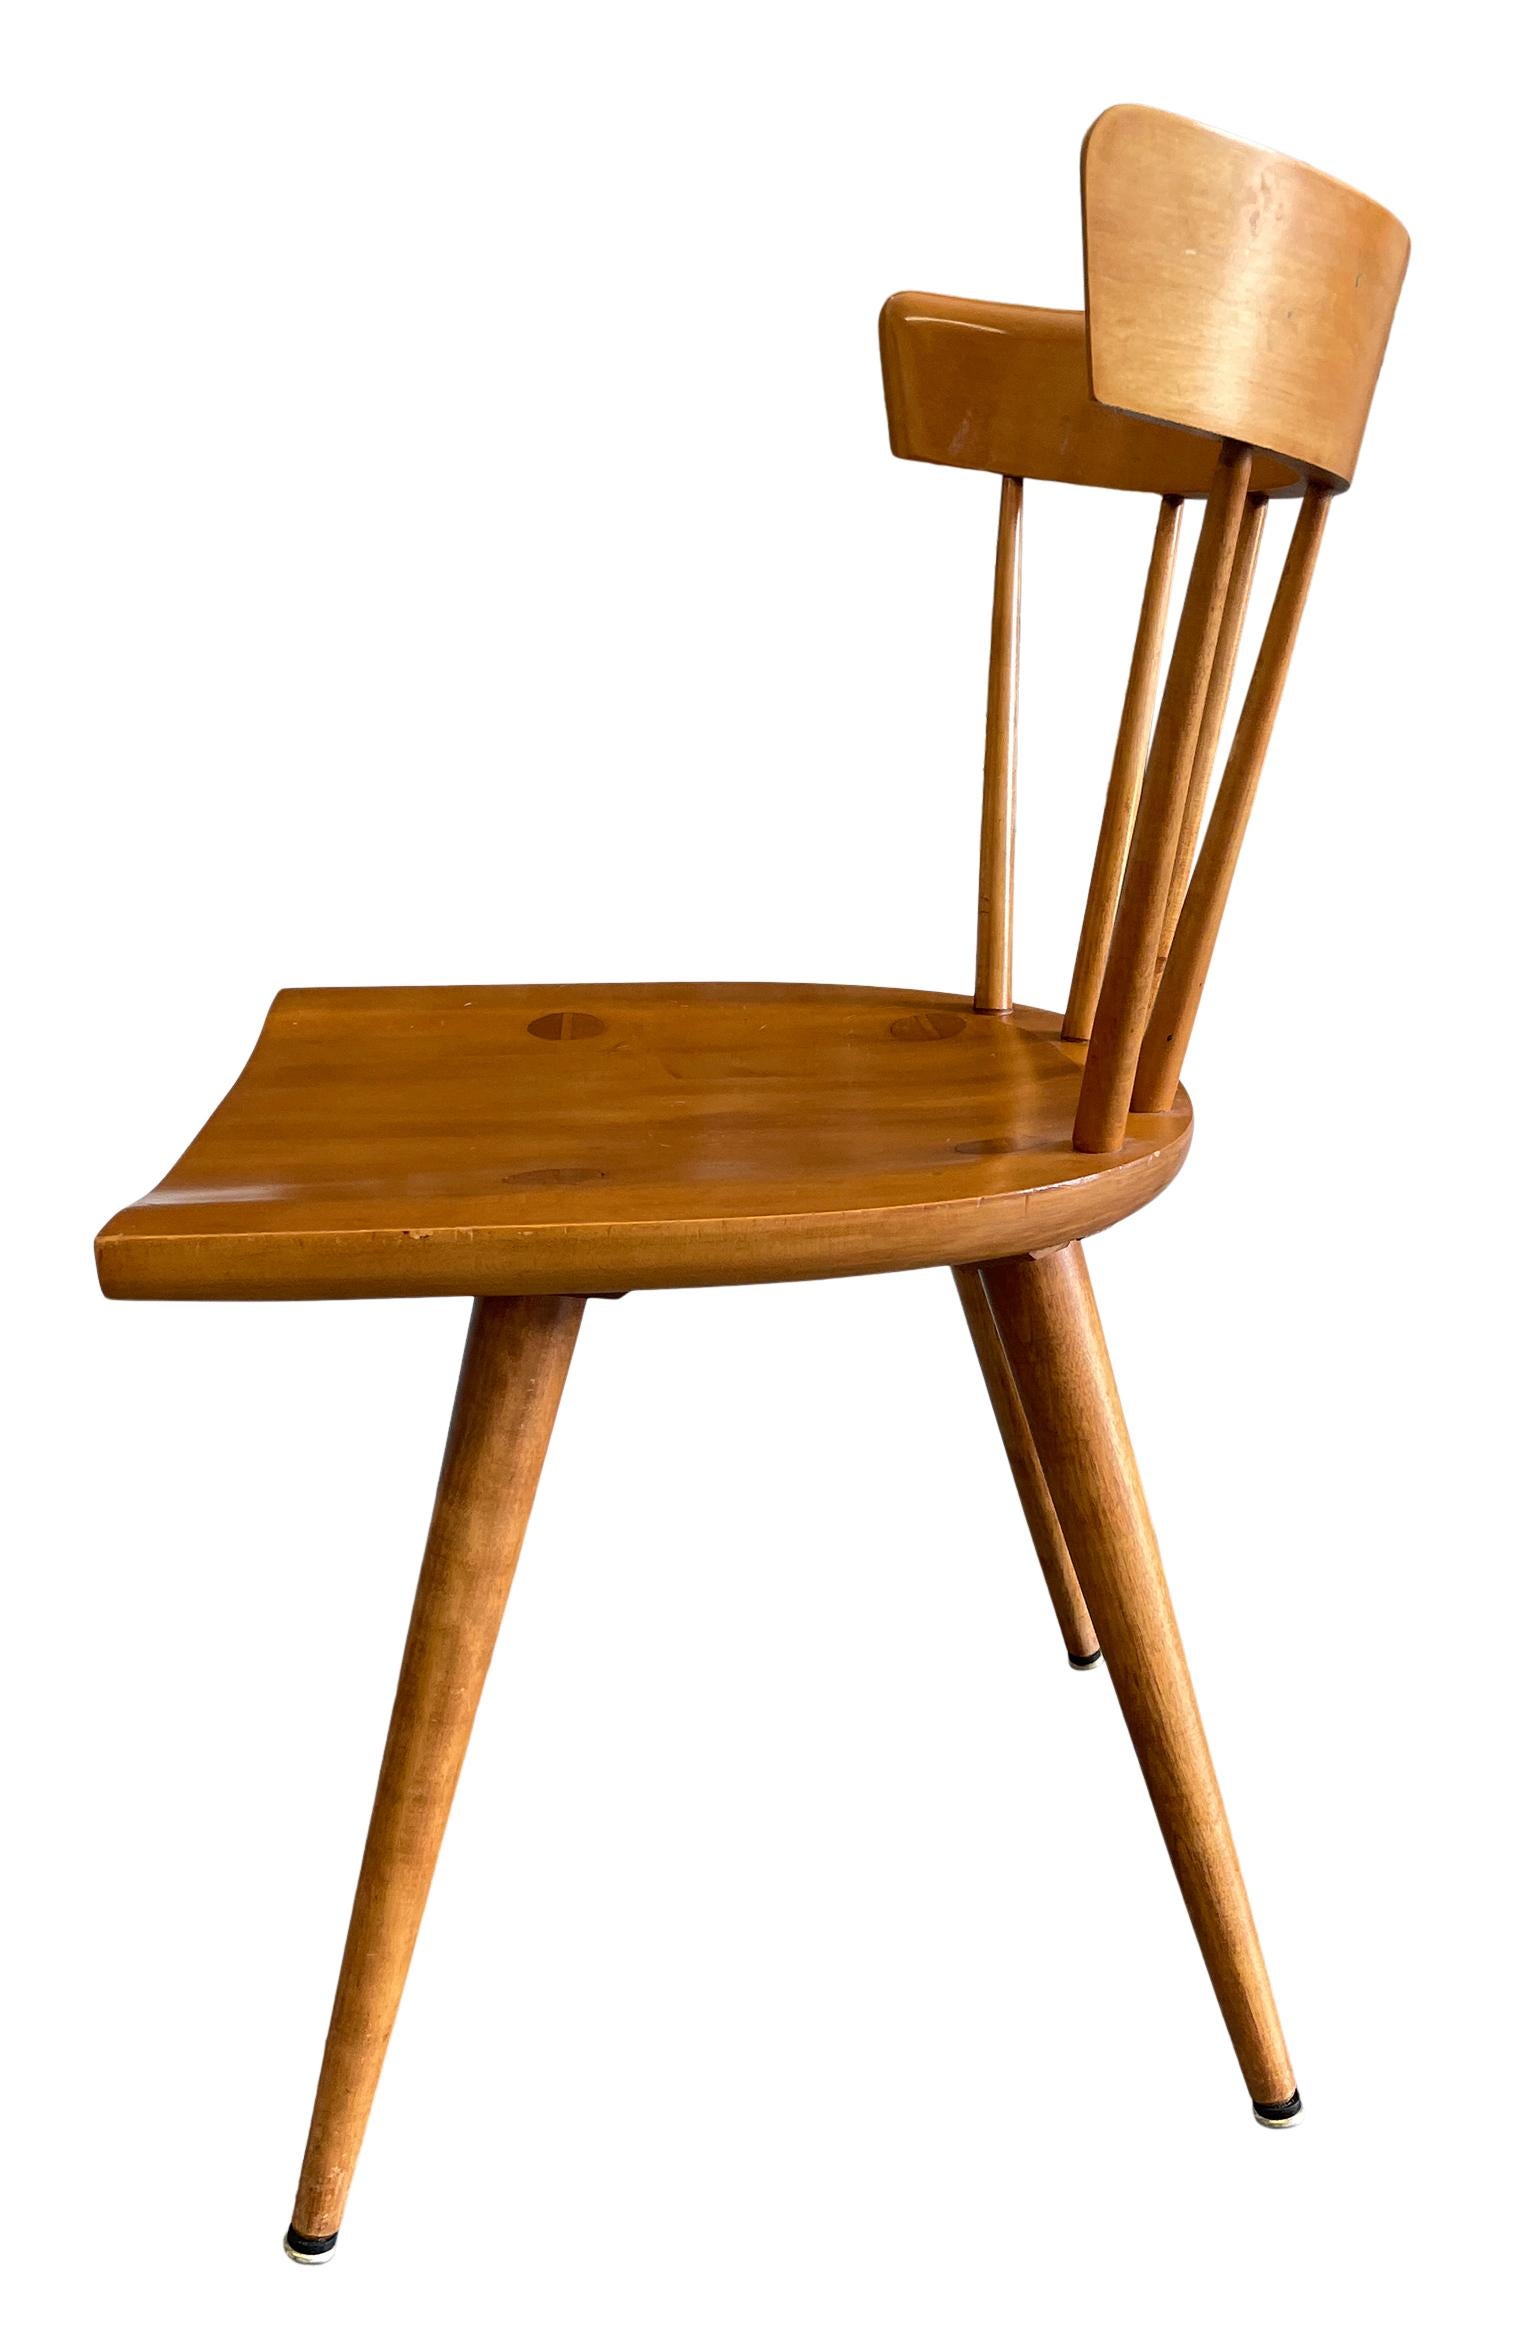 Woodwork Mid-Century Paul McCobb Planner Group Dining Chairs Maple Spindle Back Chairs For Sale